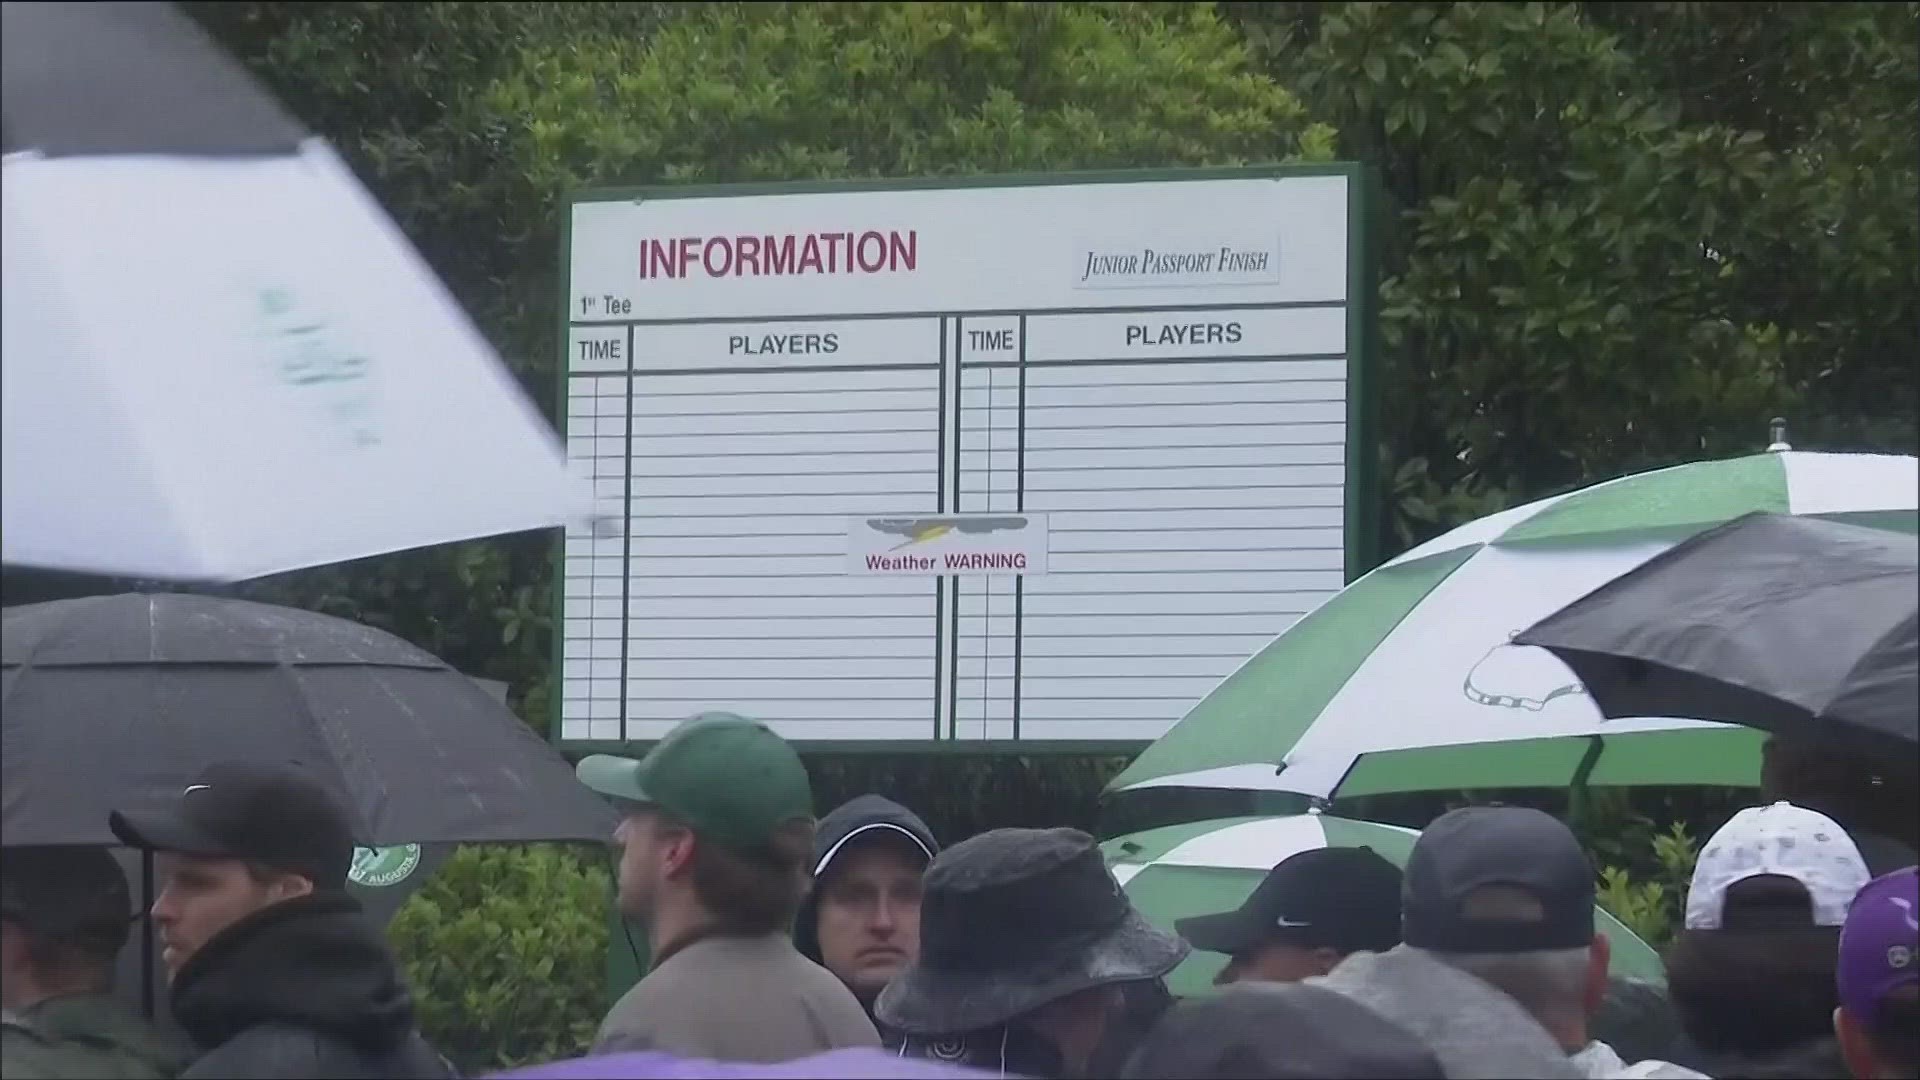 Play was suspended at 3:12 p.m. for the remainder of the third round. The tournament is planned, for now, on still finishing on Sunday.